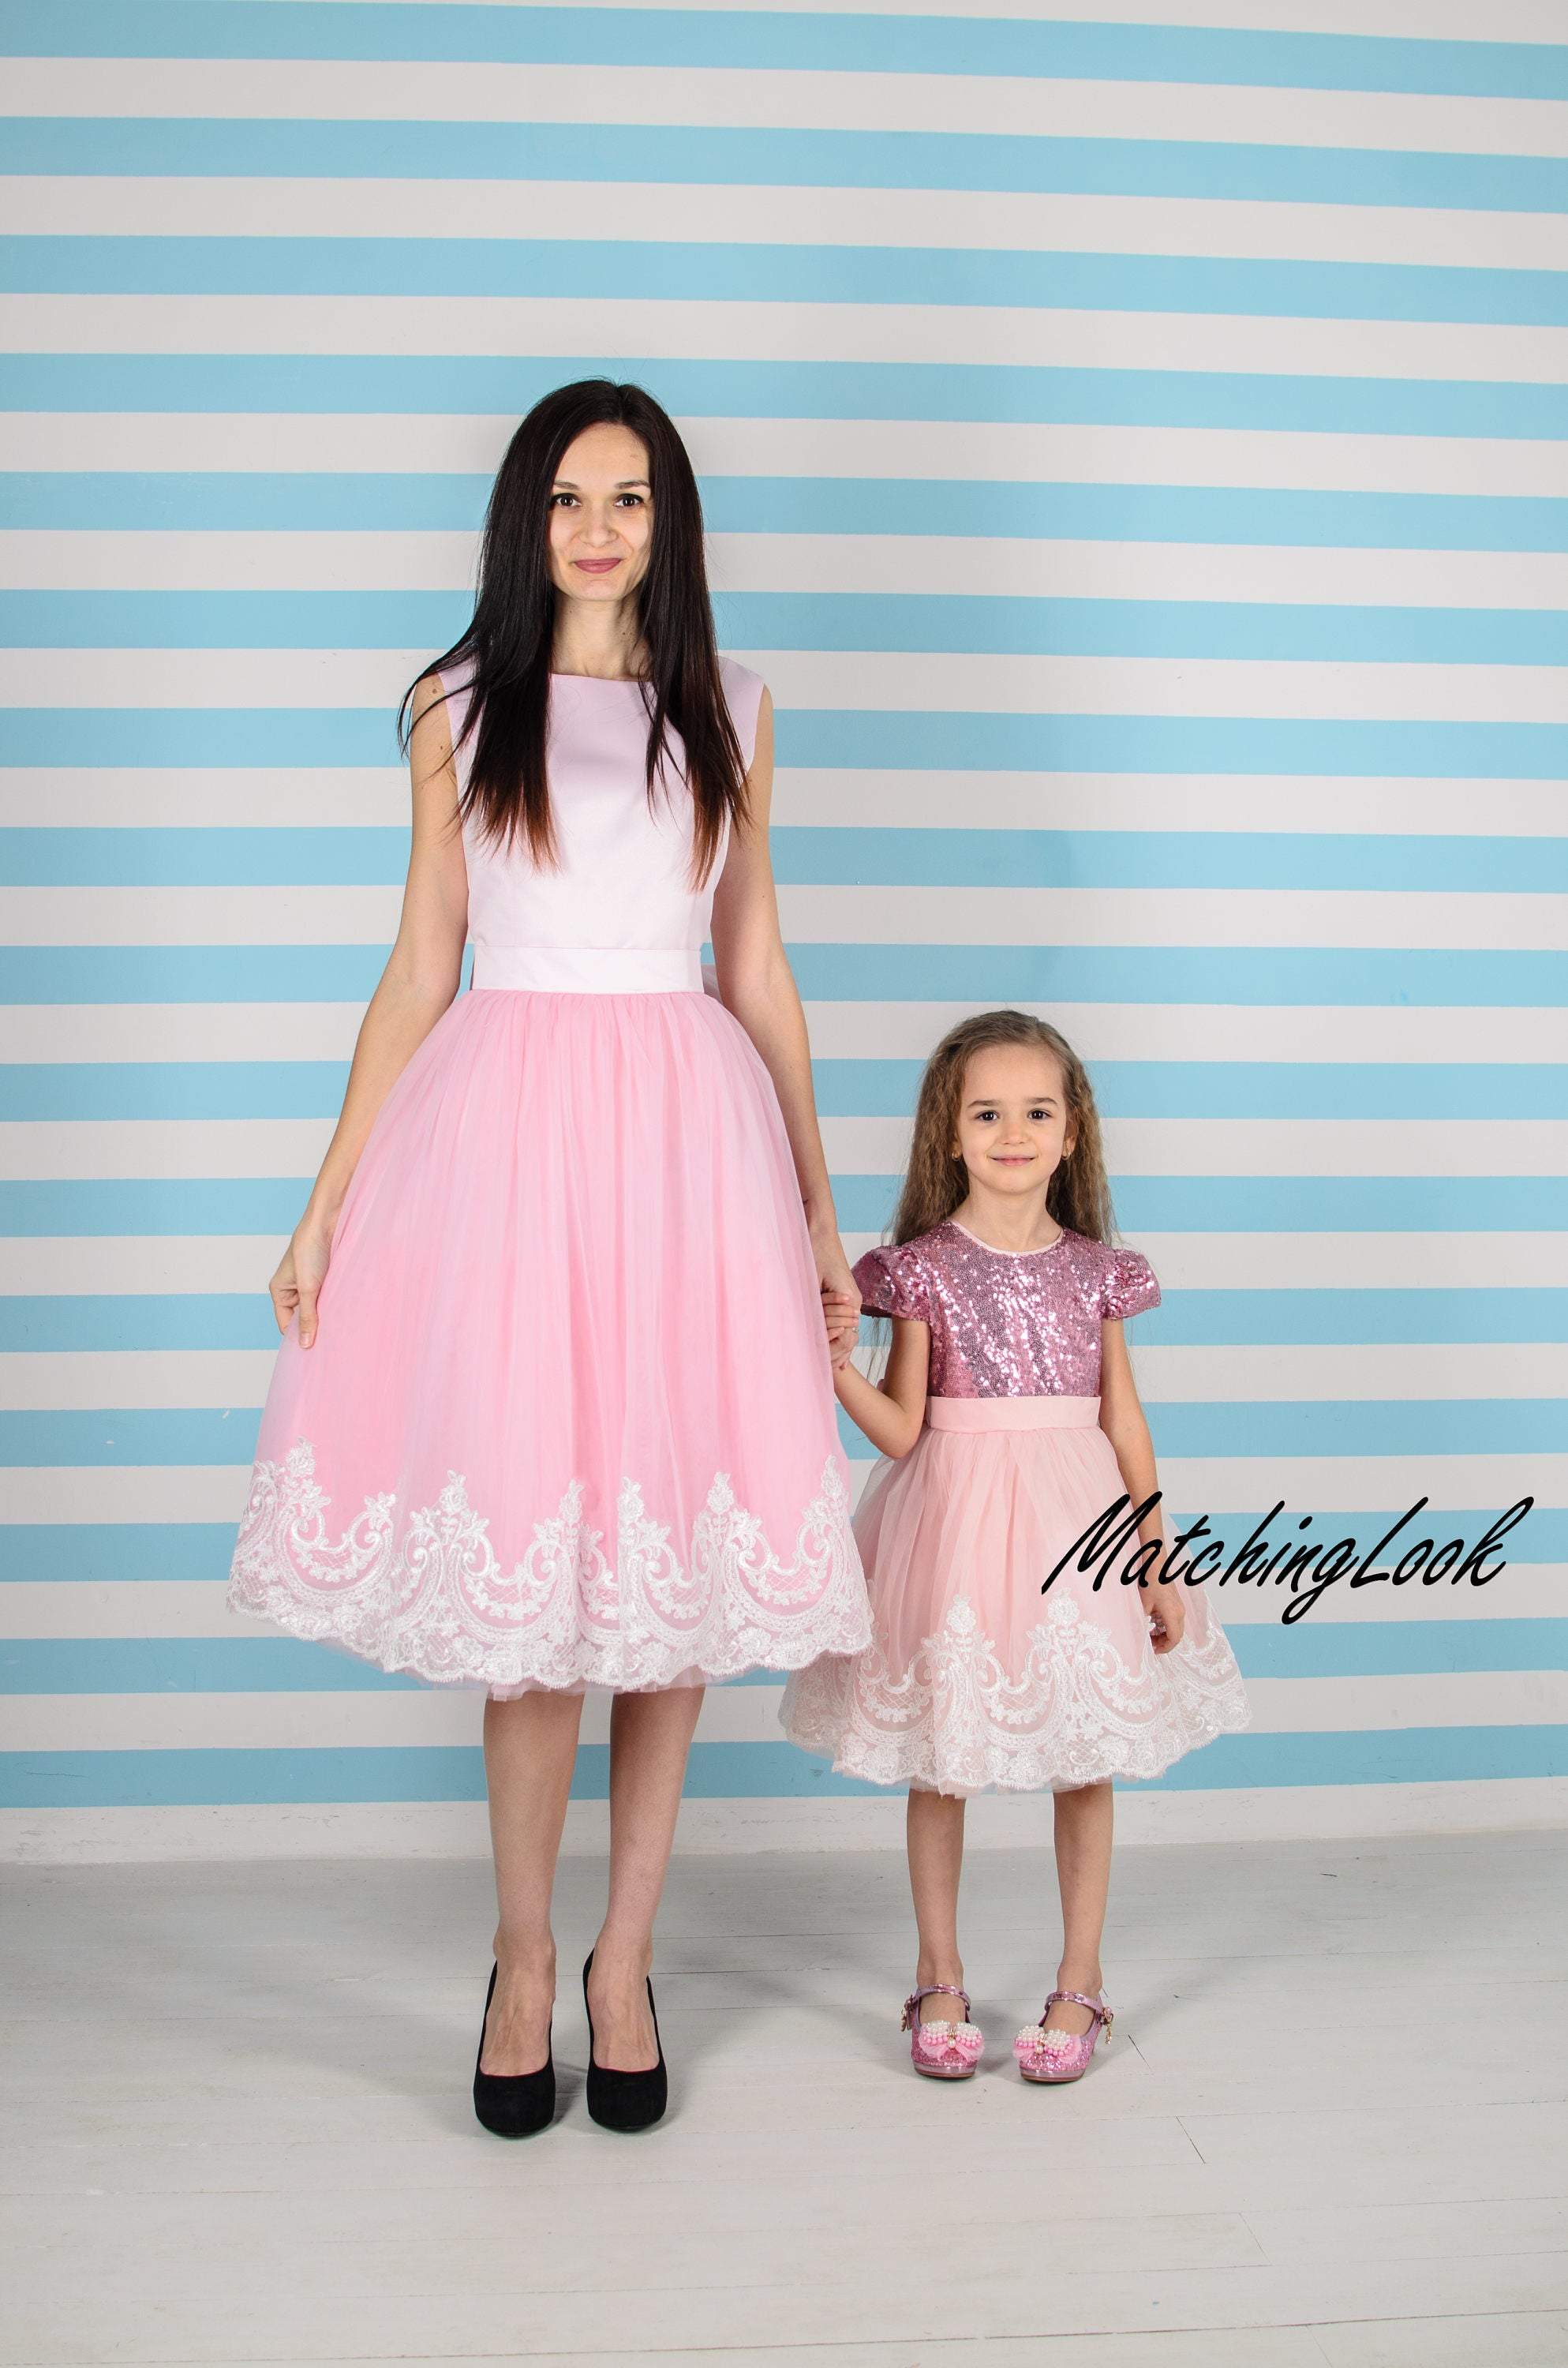 matching mom and daughter easter dresses